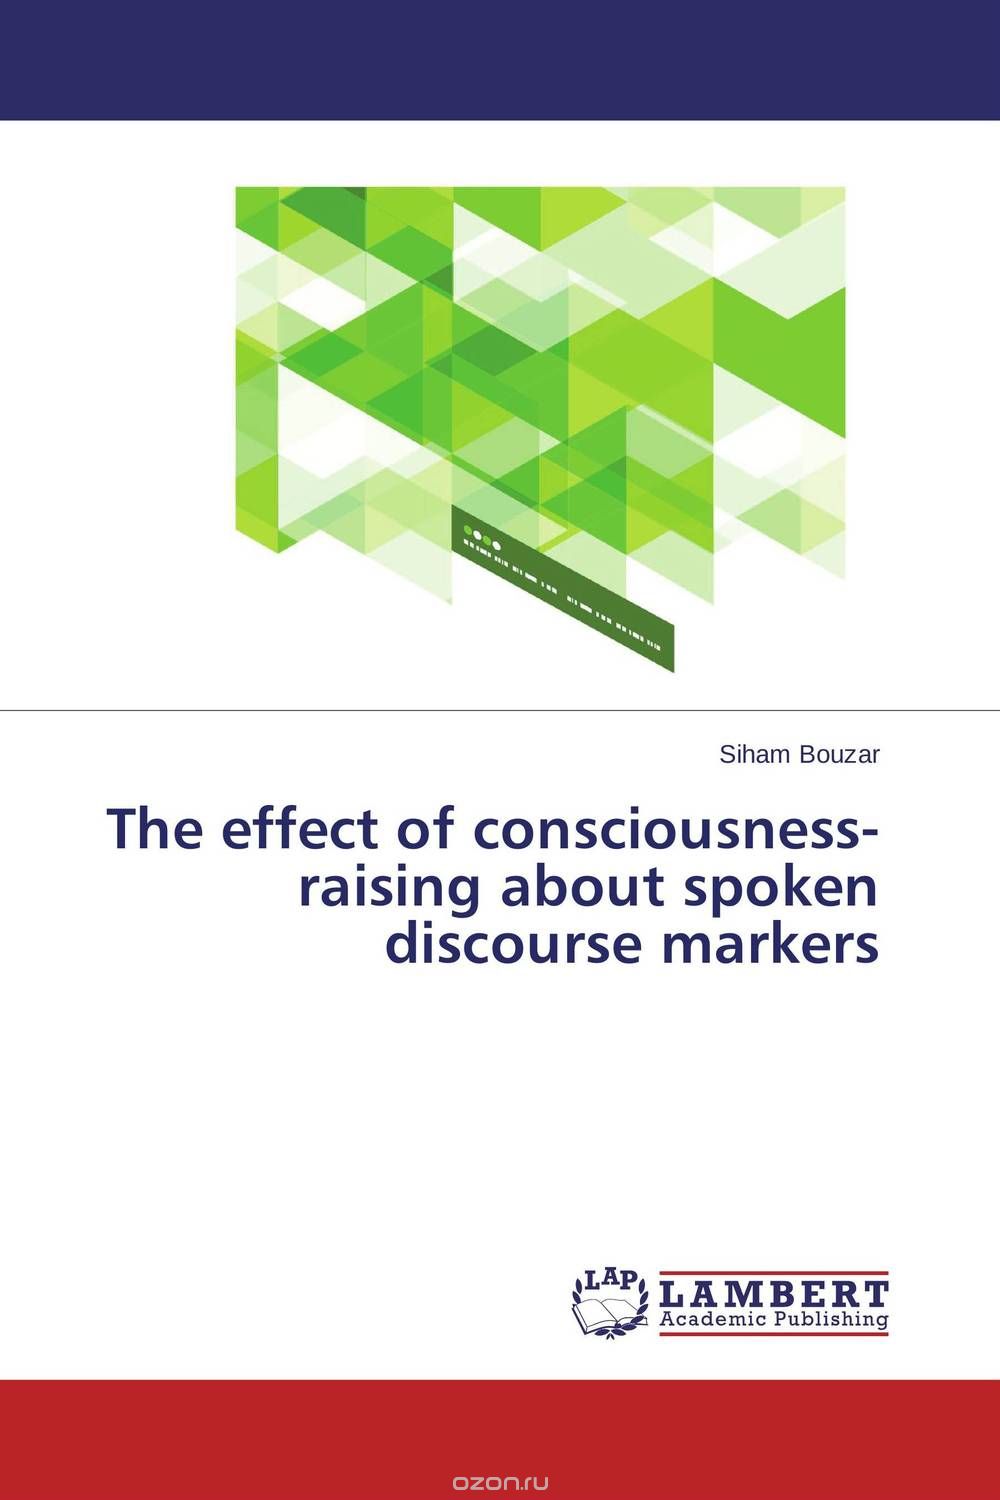 The effect of consciousness-raising about spoken discourse markers